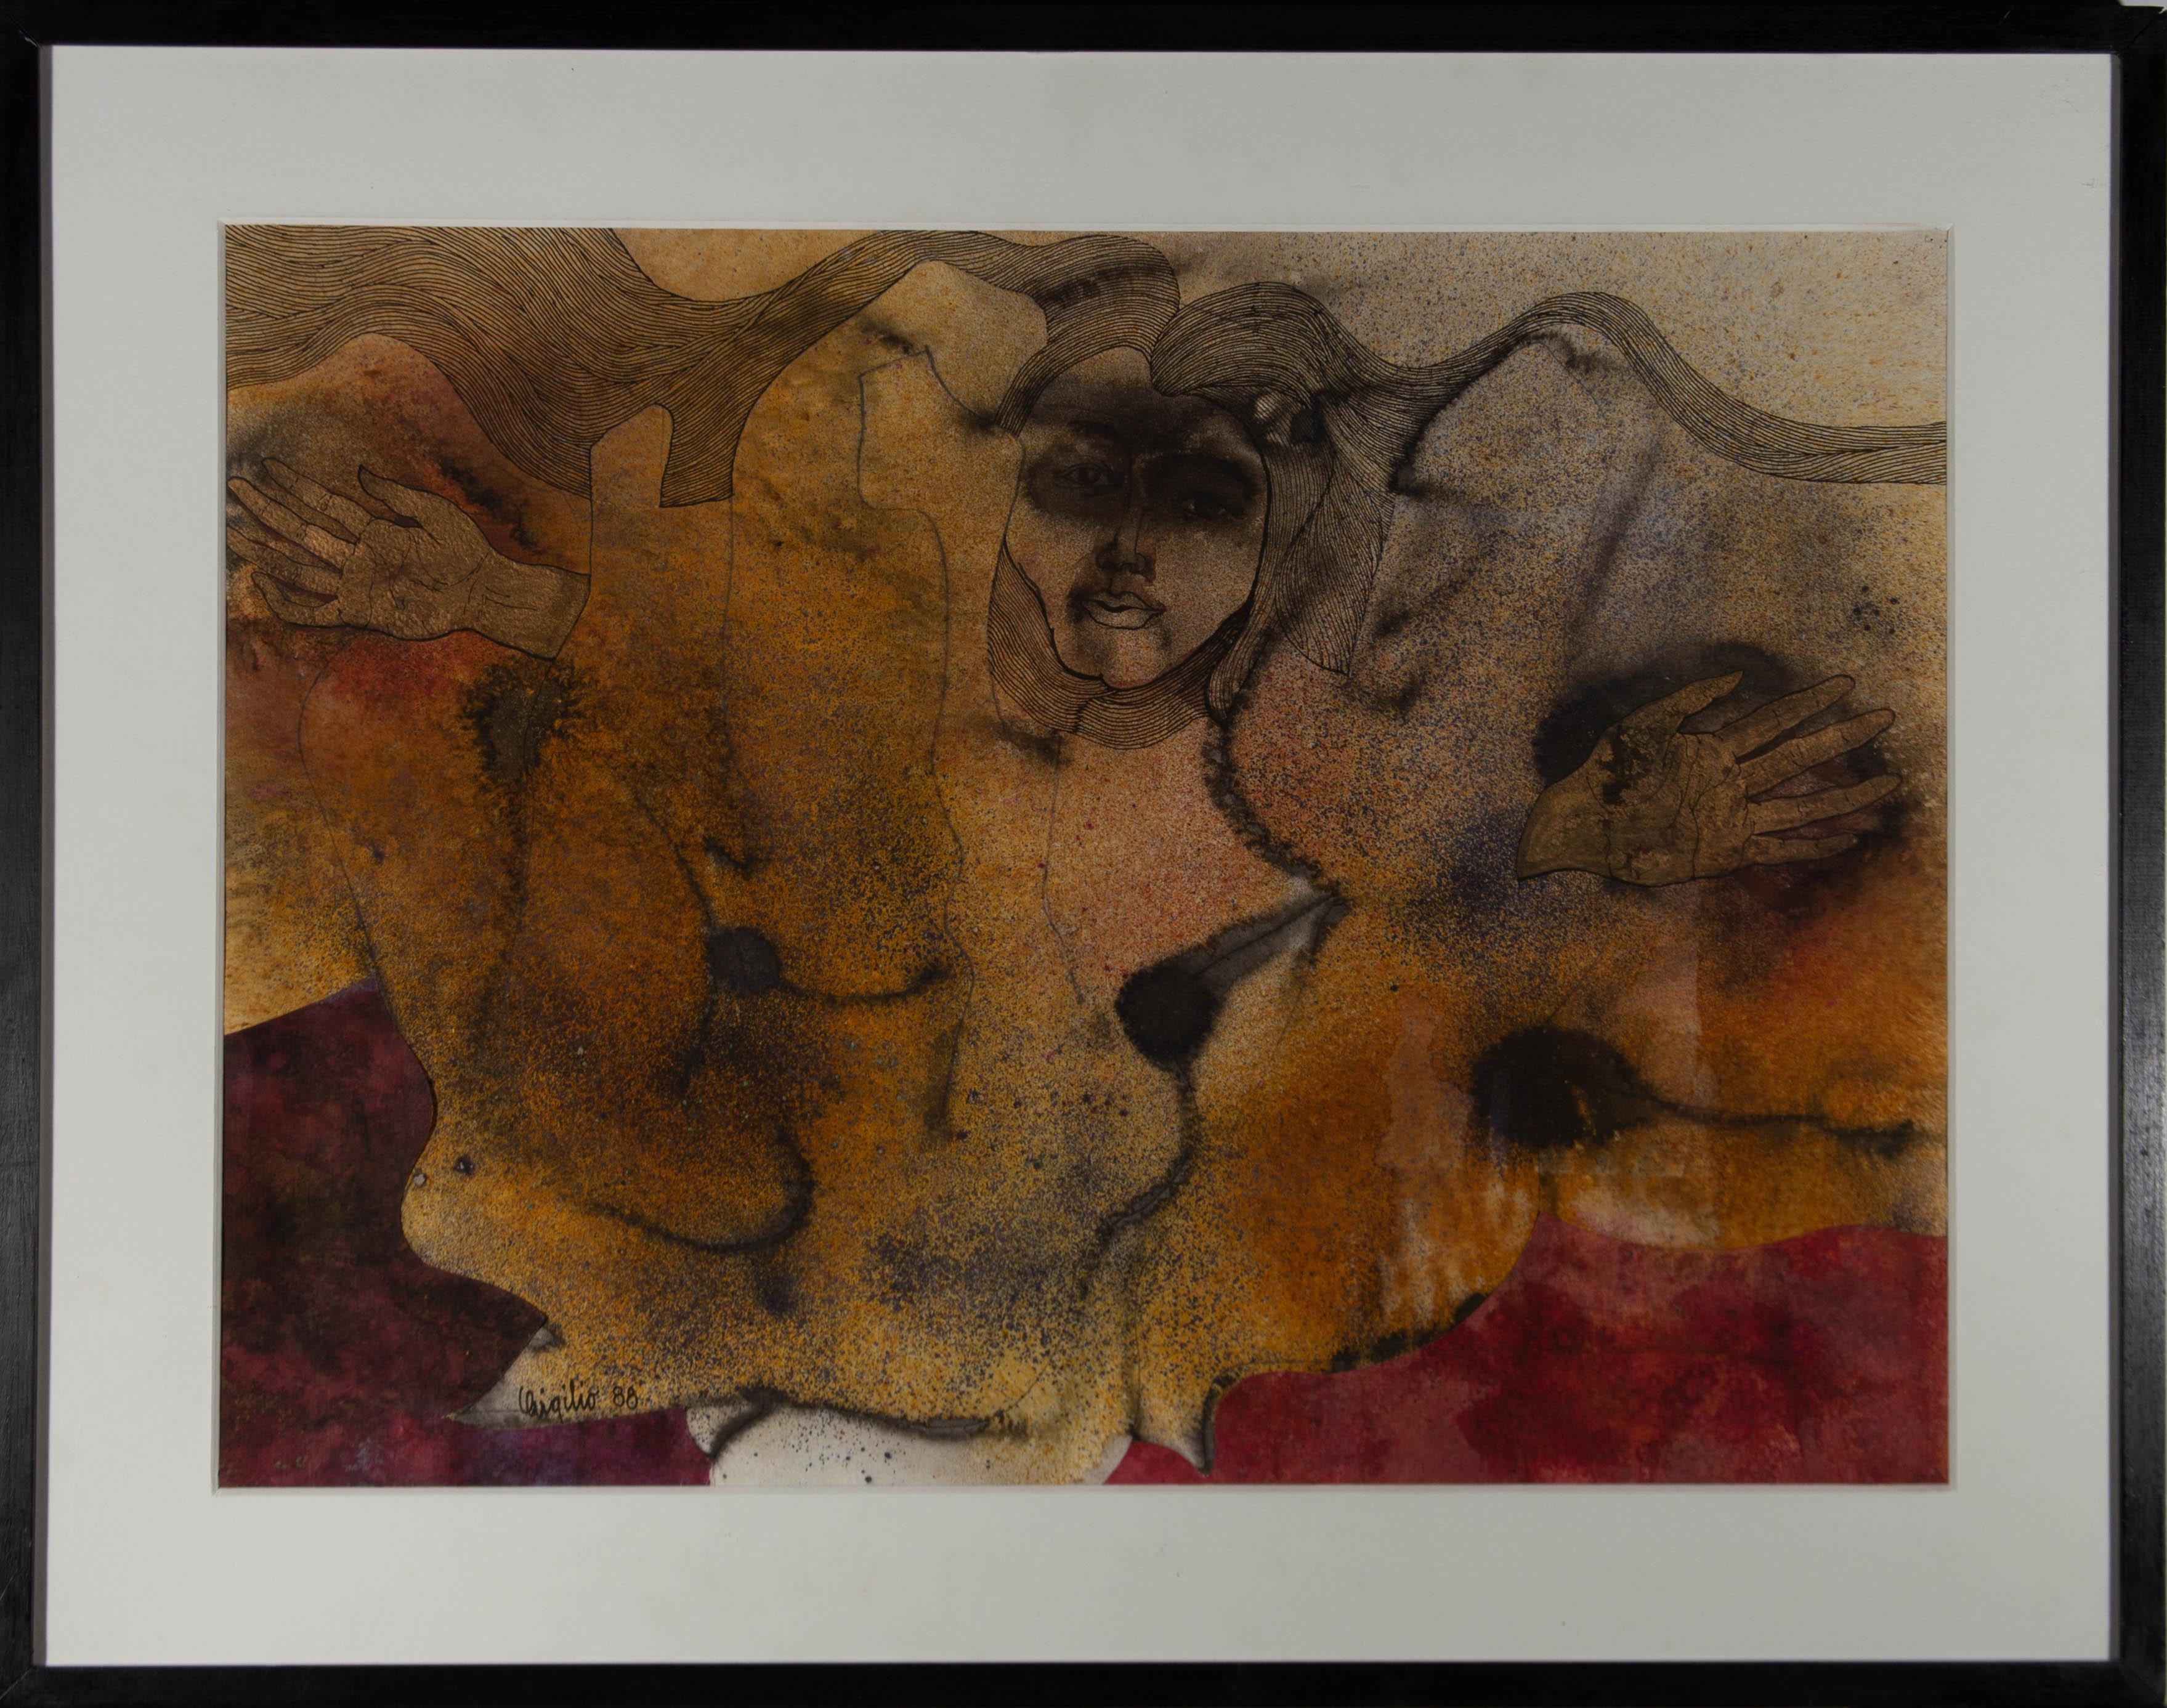 1988 Mixed Media - Floating In The Aether - Mixed Media Art by Unknown